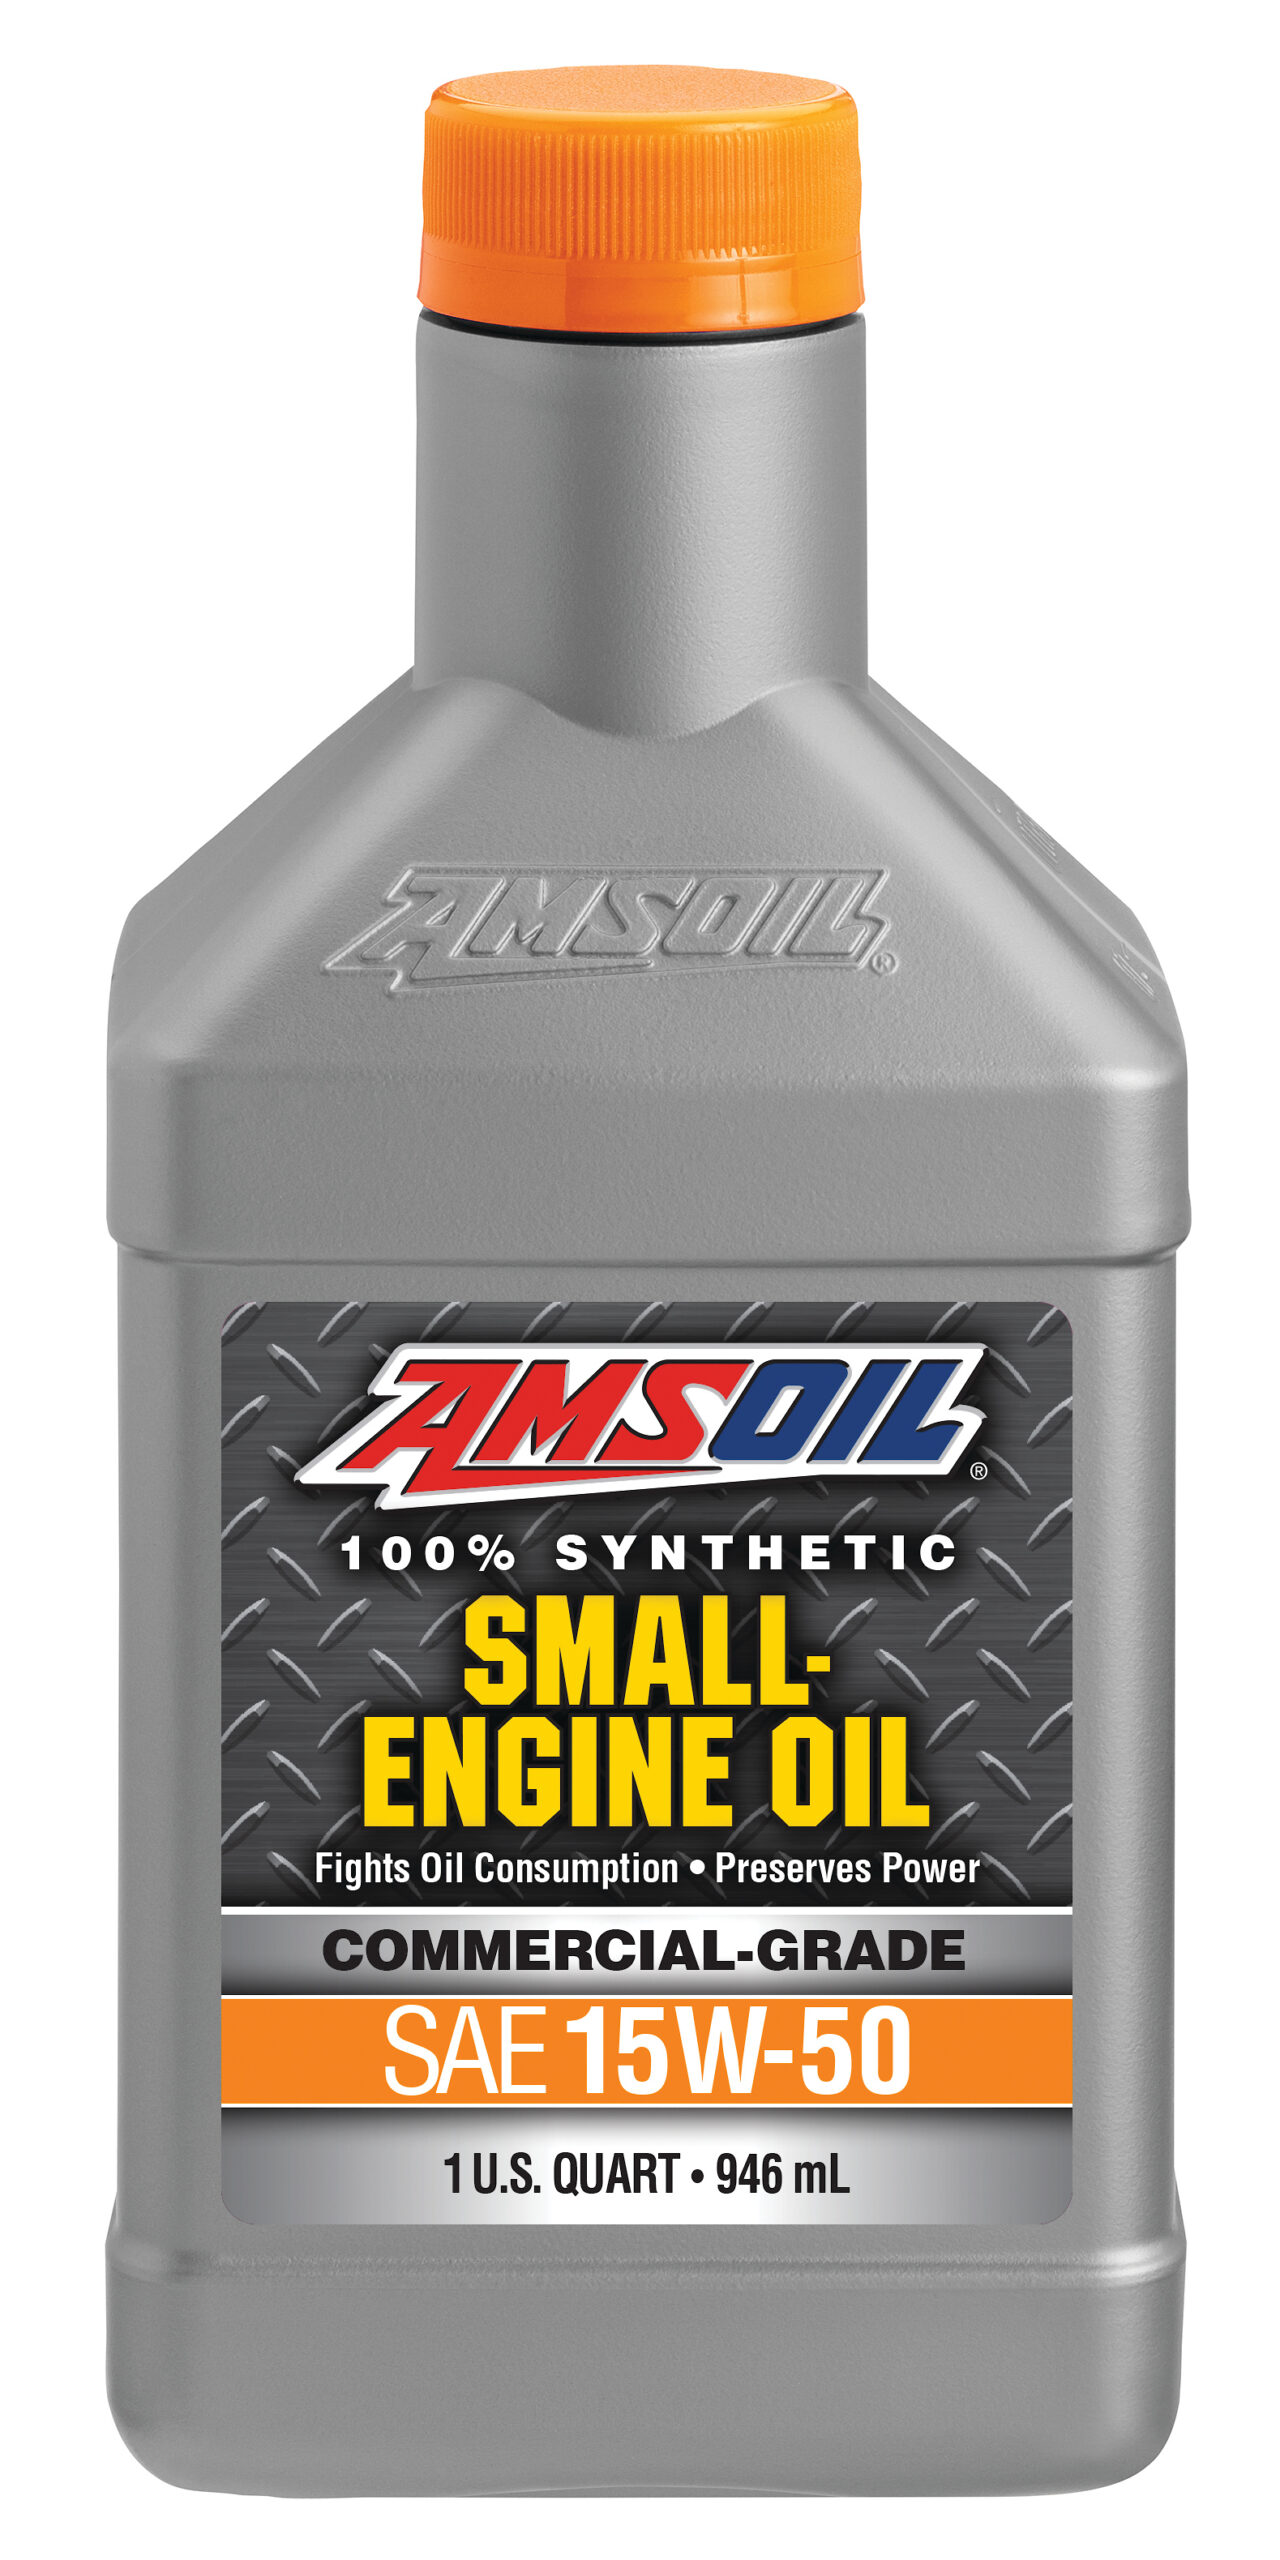 AMSOIL Introduces New 15W-50 Synthetic Small-Engine Oil